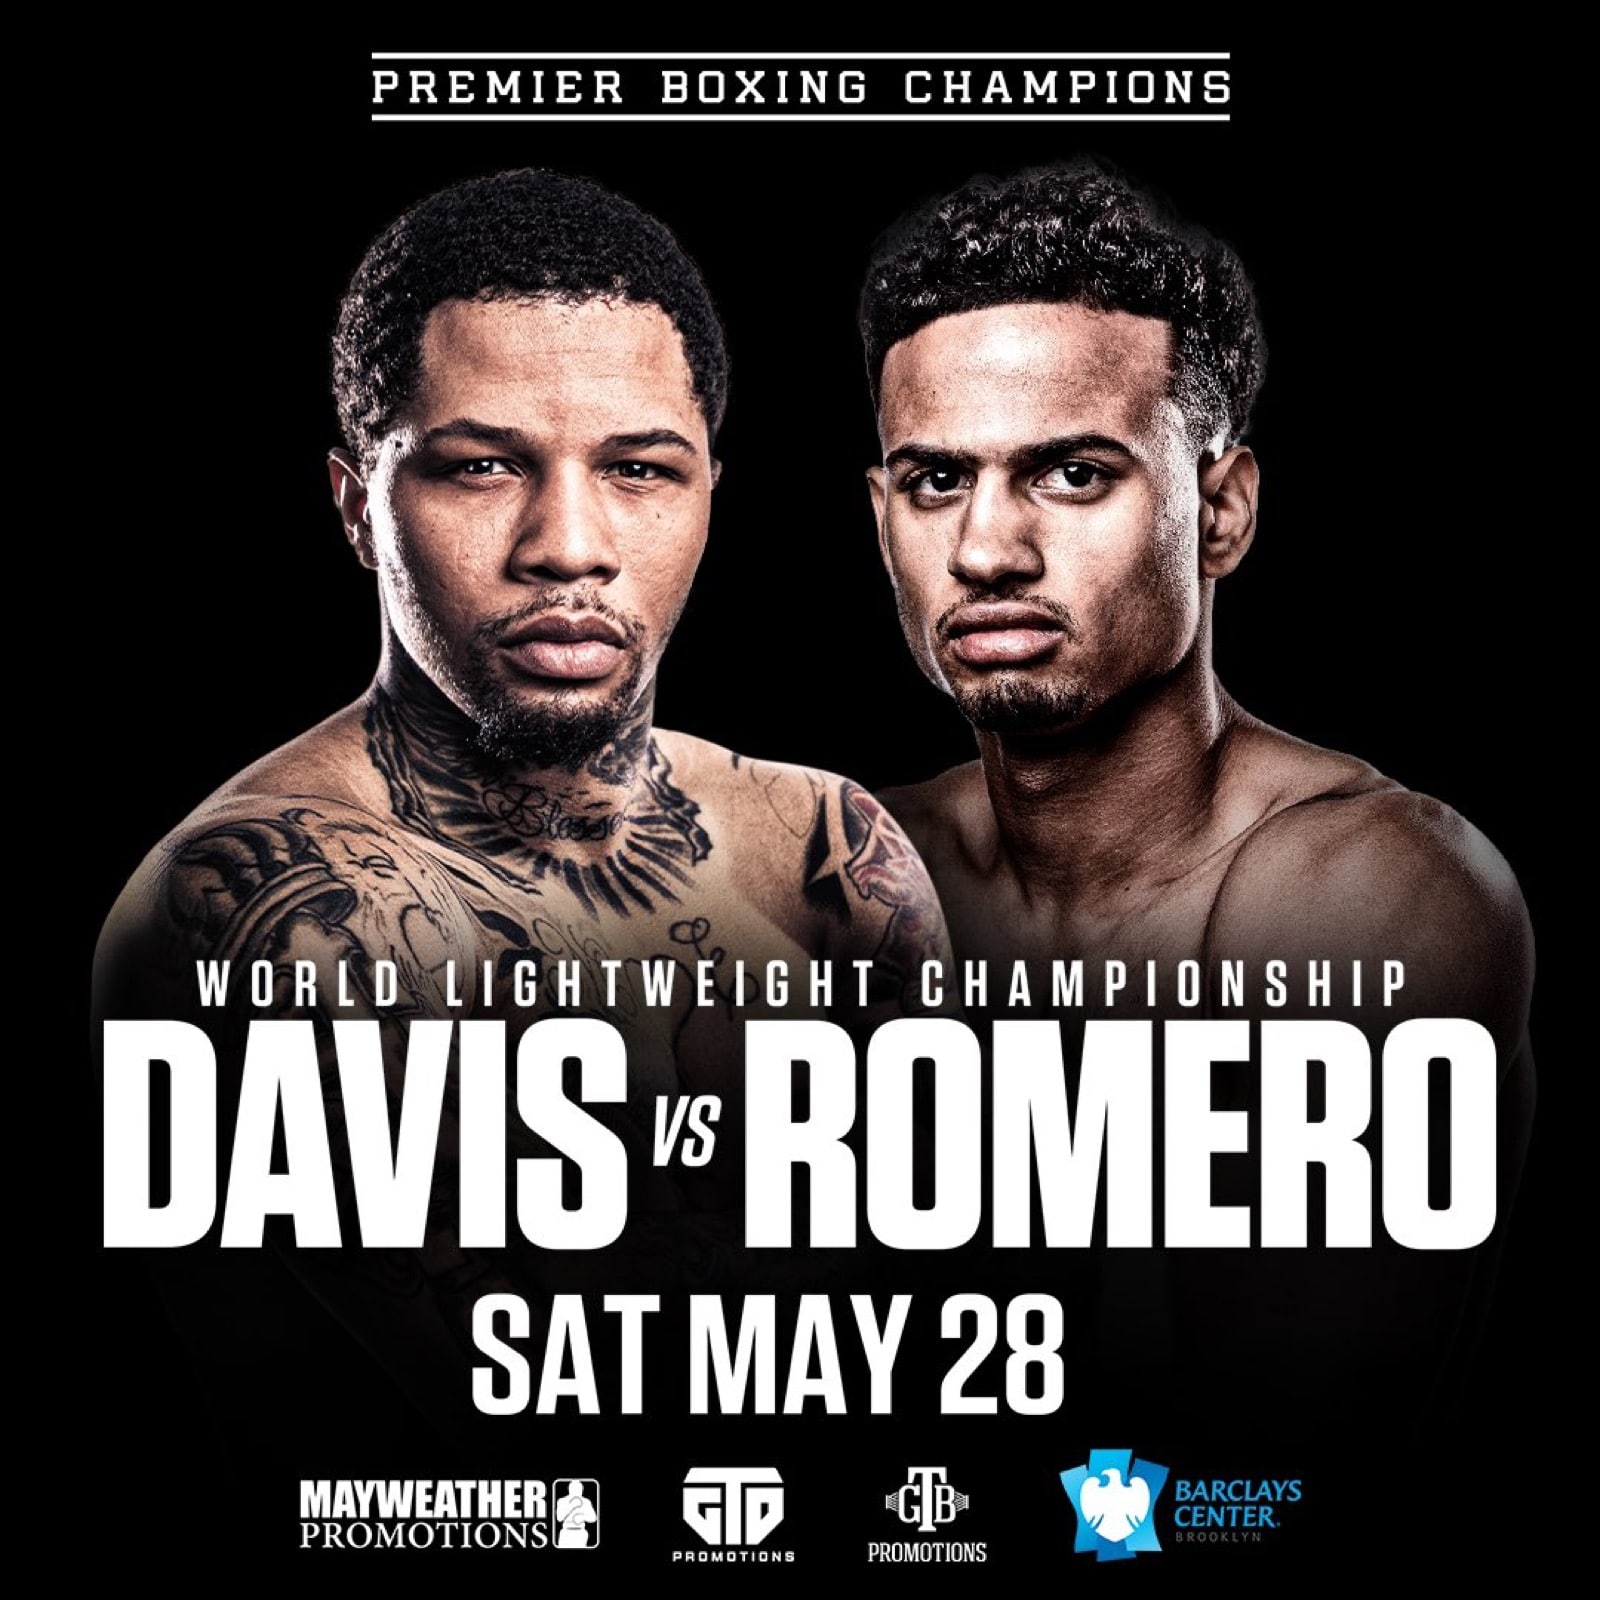 Image: Bob Arum says Rolly Romero with "Not much chance" against Tank Davis